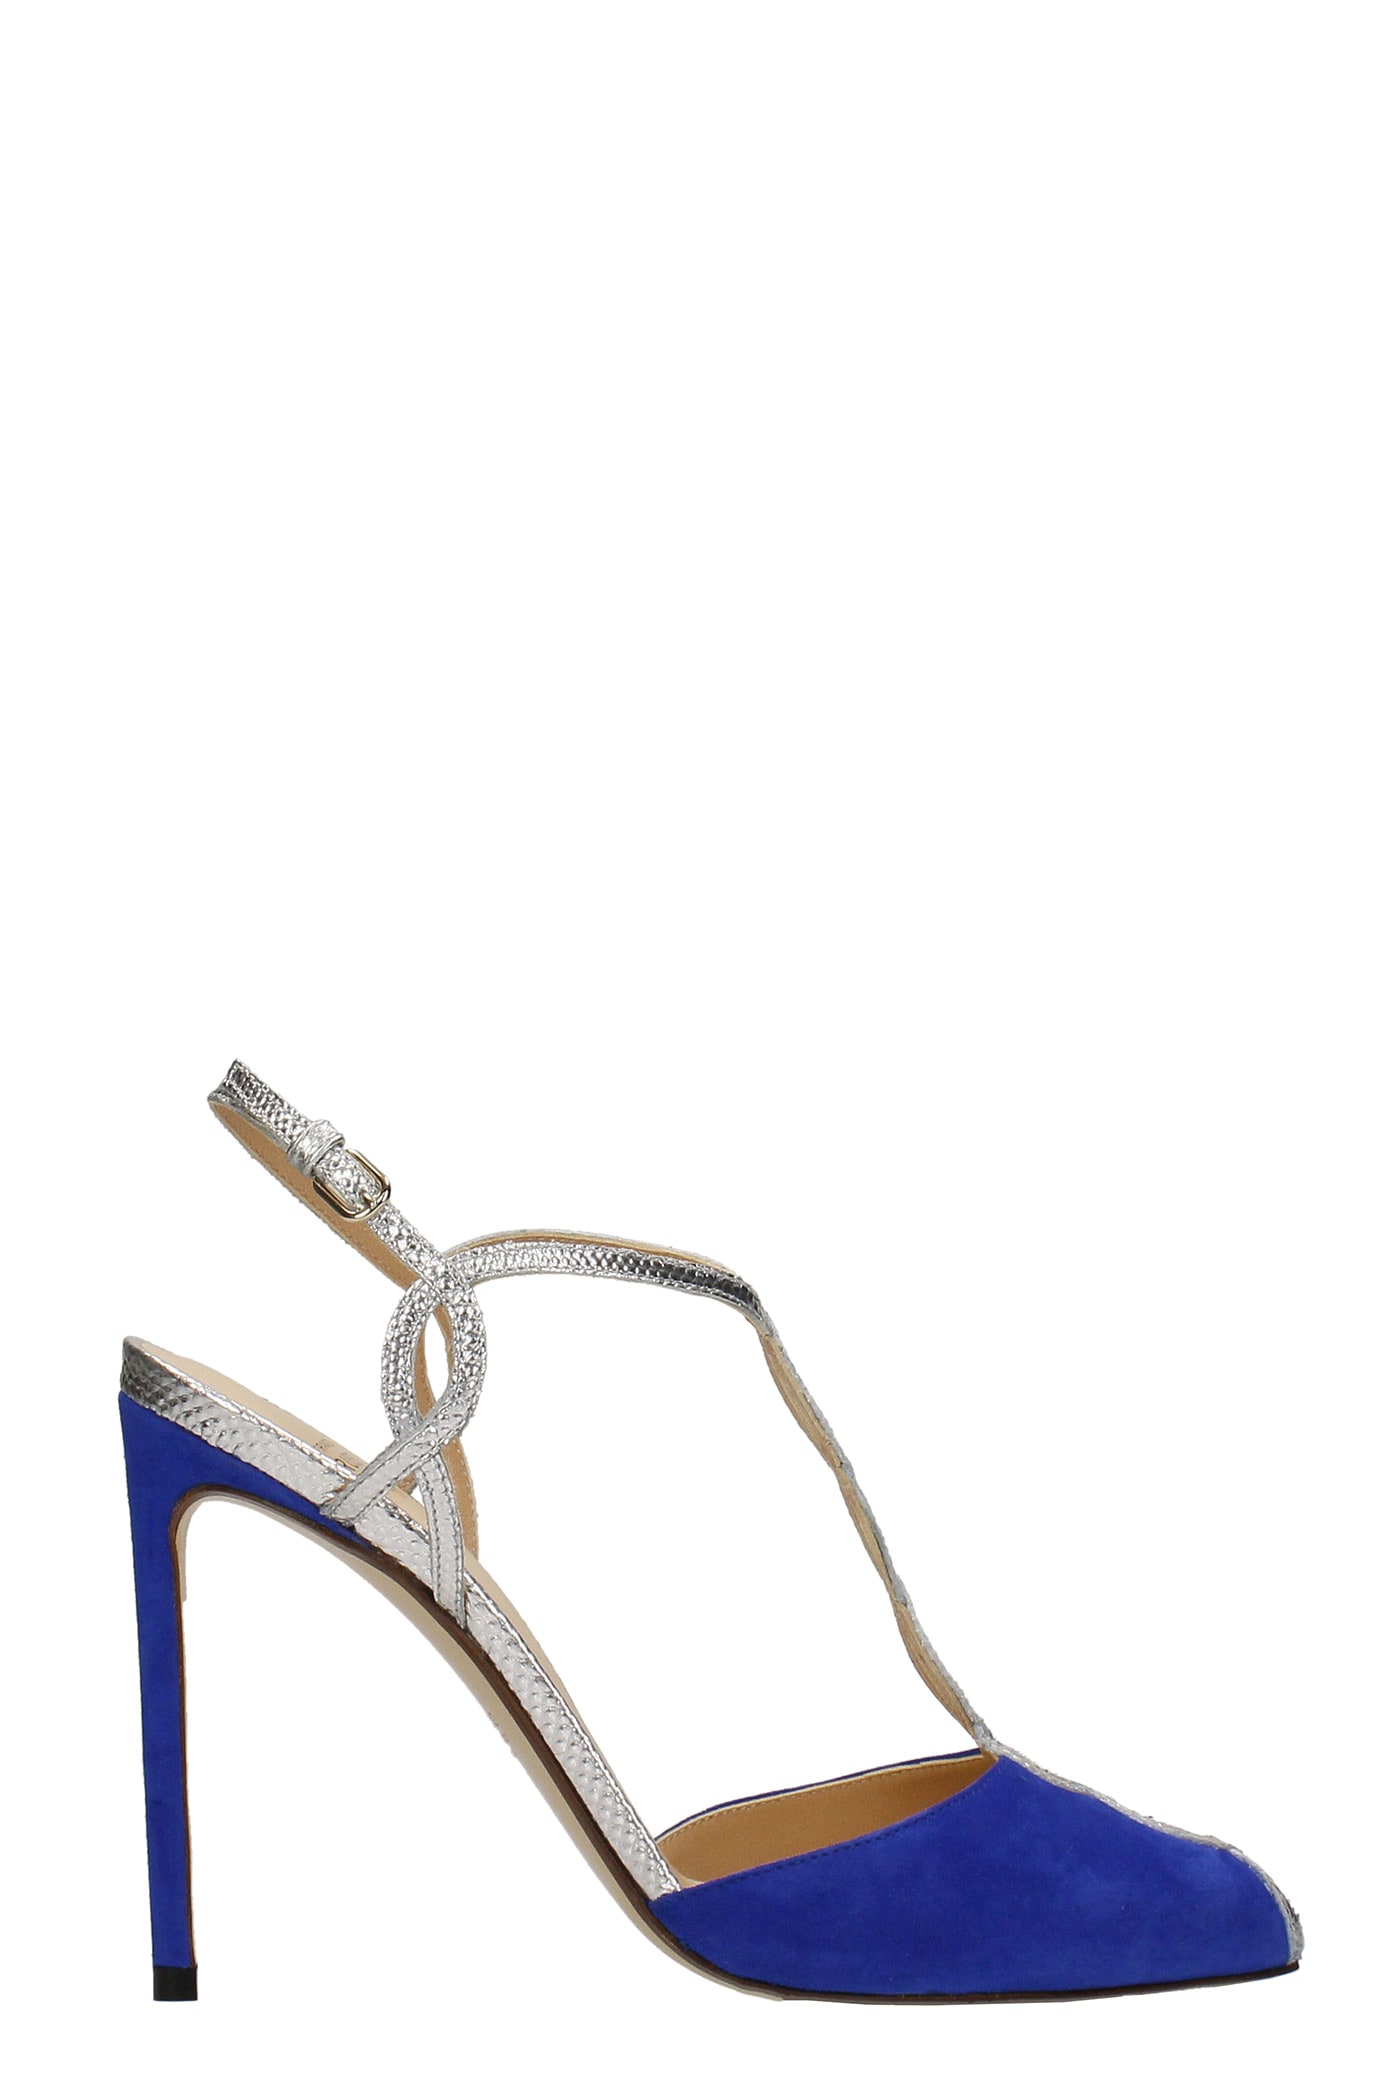 Francesco Russo Sandals In Blue Suede And Leather